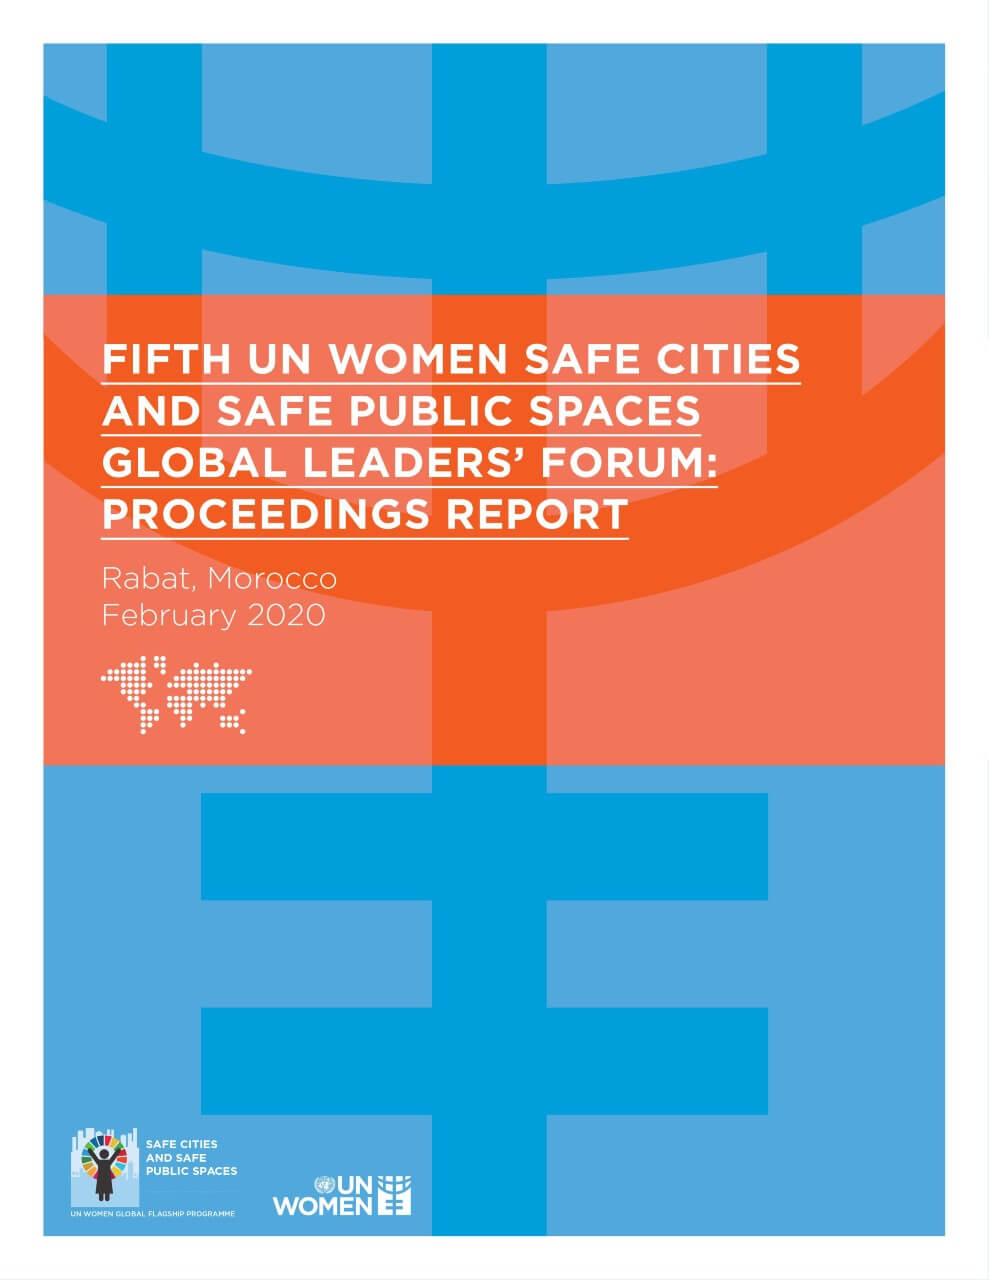 Fifth UN Women Safe Cities and Safe Public Spaces Global Leaders' Forum: Proceedings report